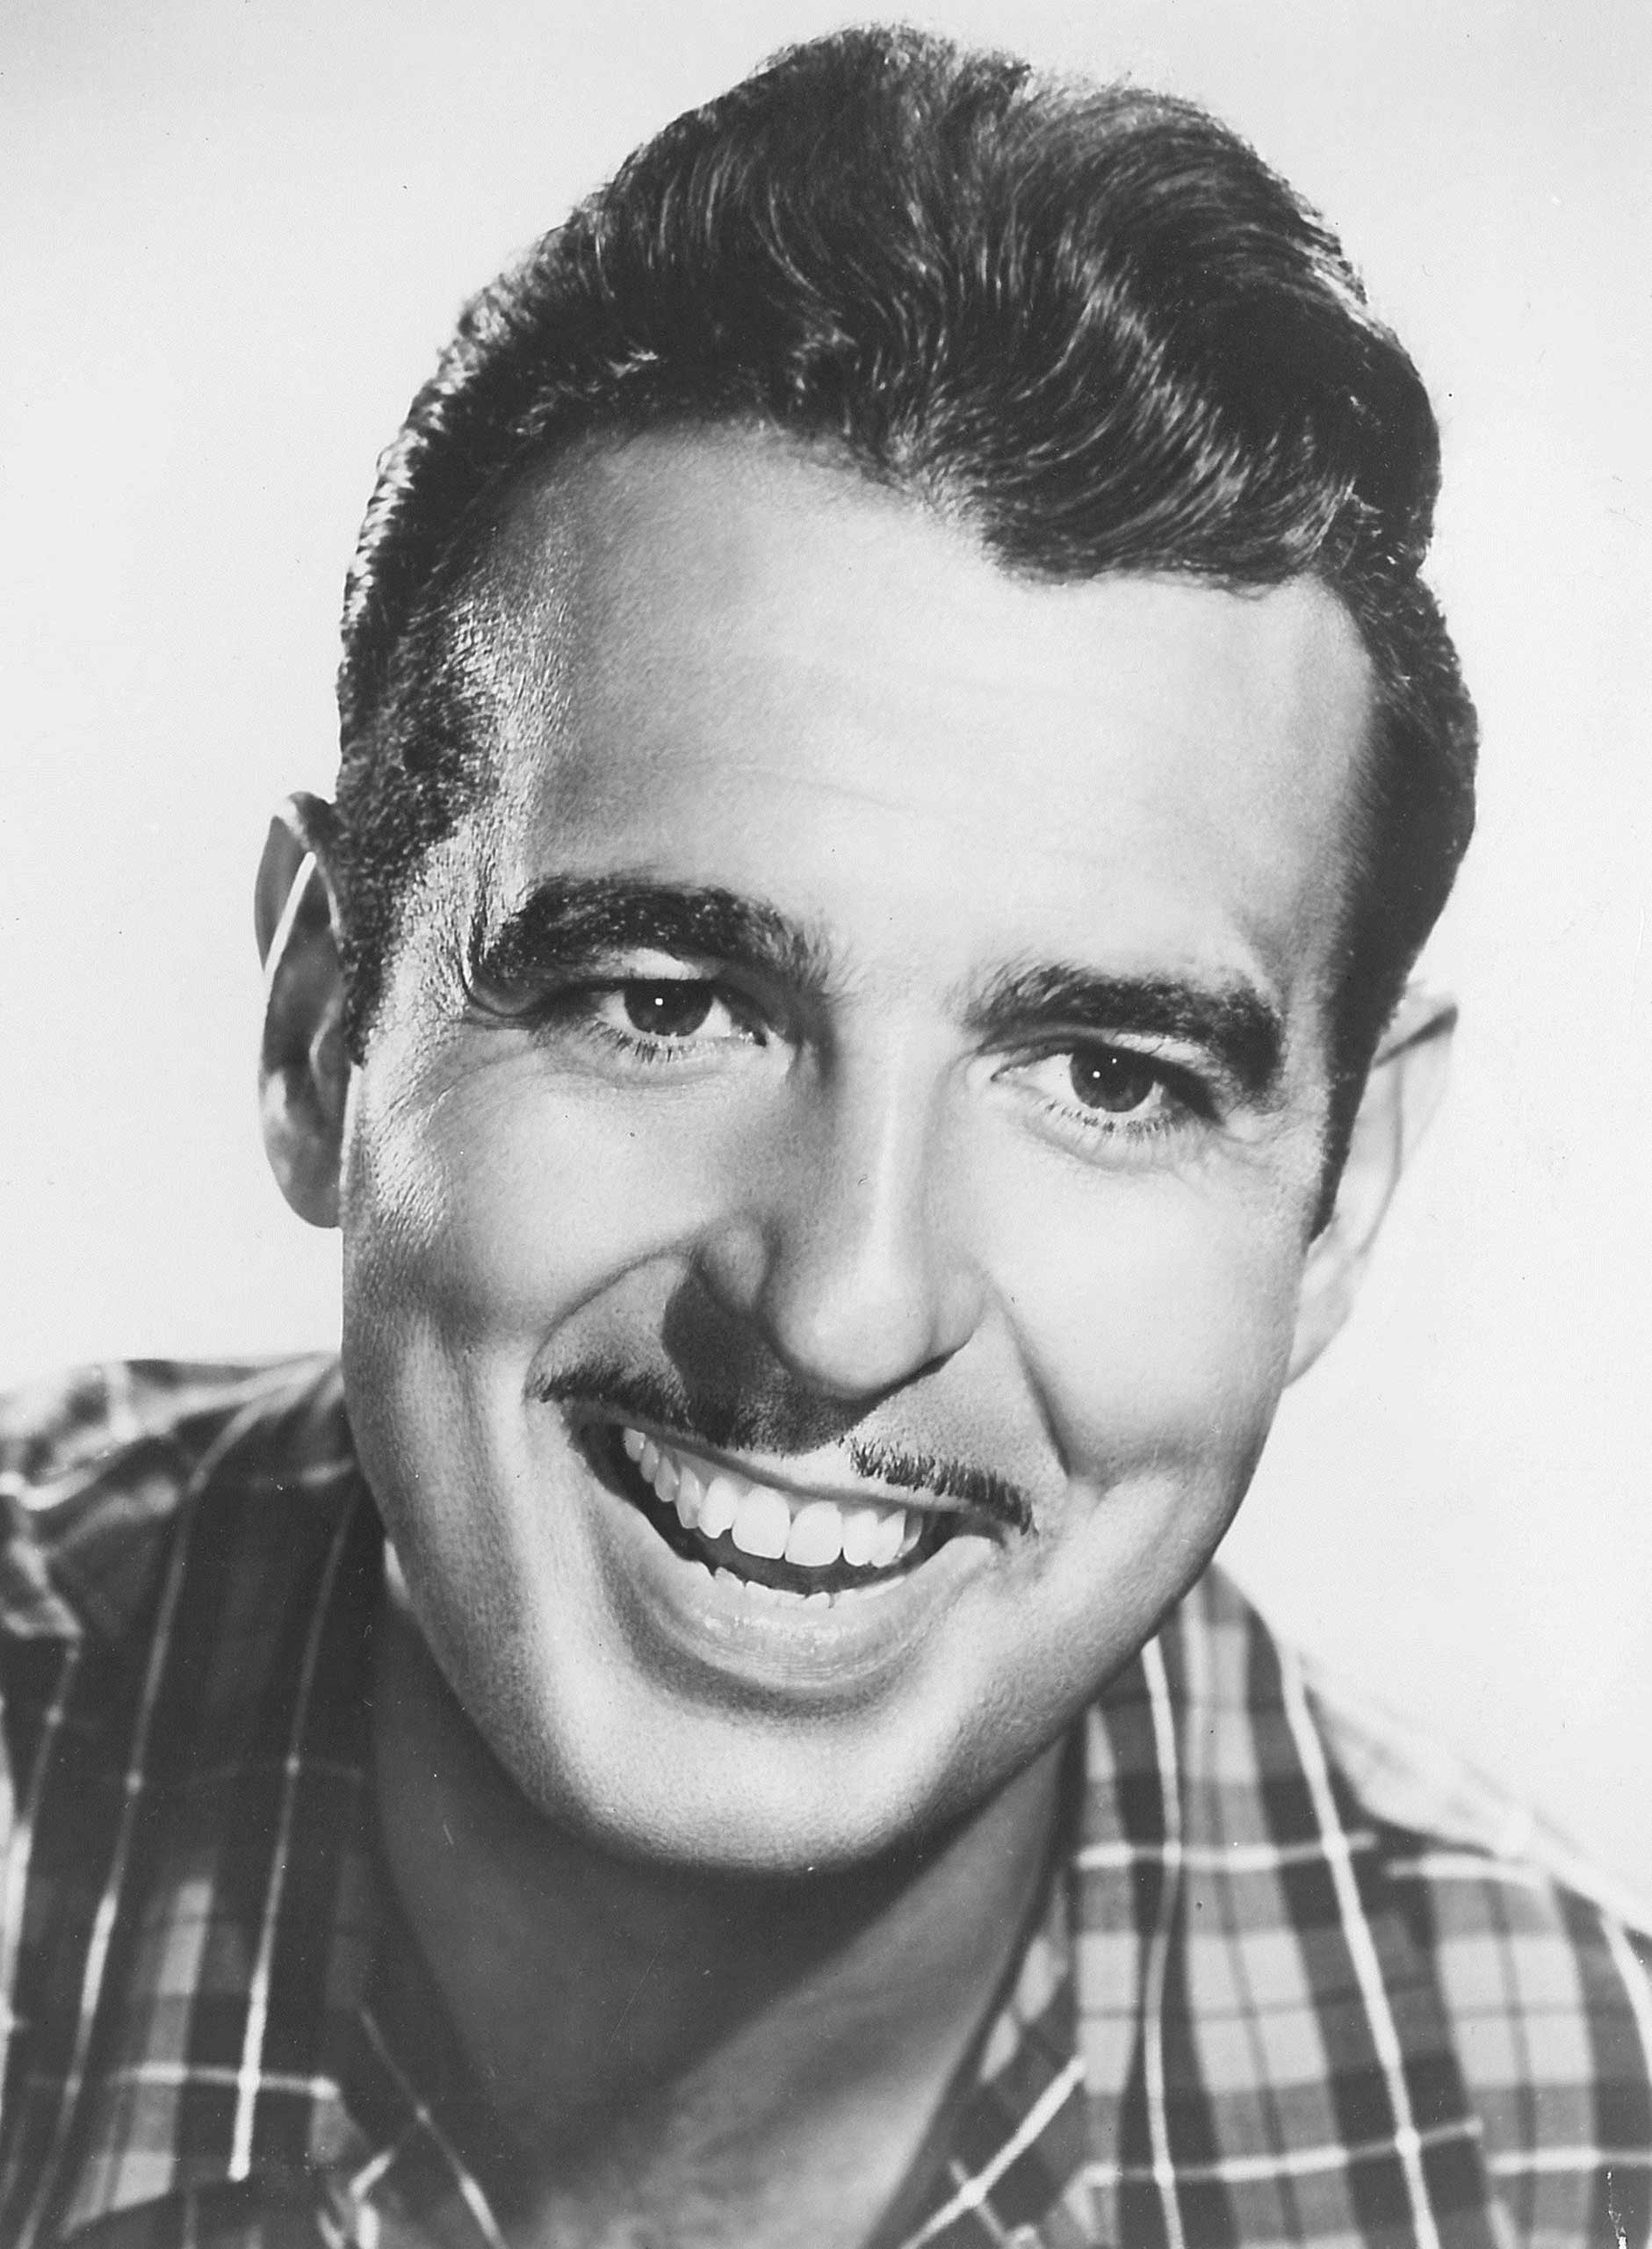 Released as a B-side, Tennessee Ernie Ford's cover of  Sixteen Tons  stood out among more lighthearted country songs of the 1950s. (Library of Congress)